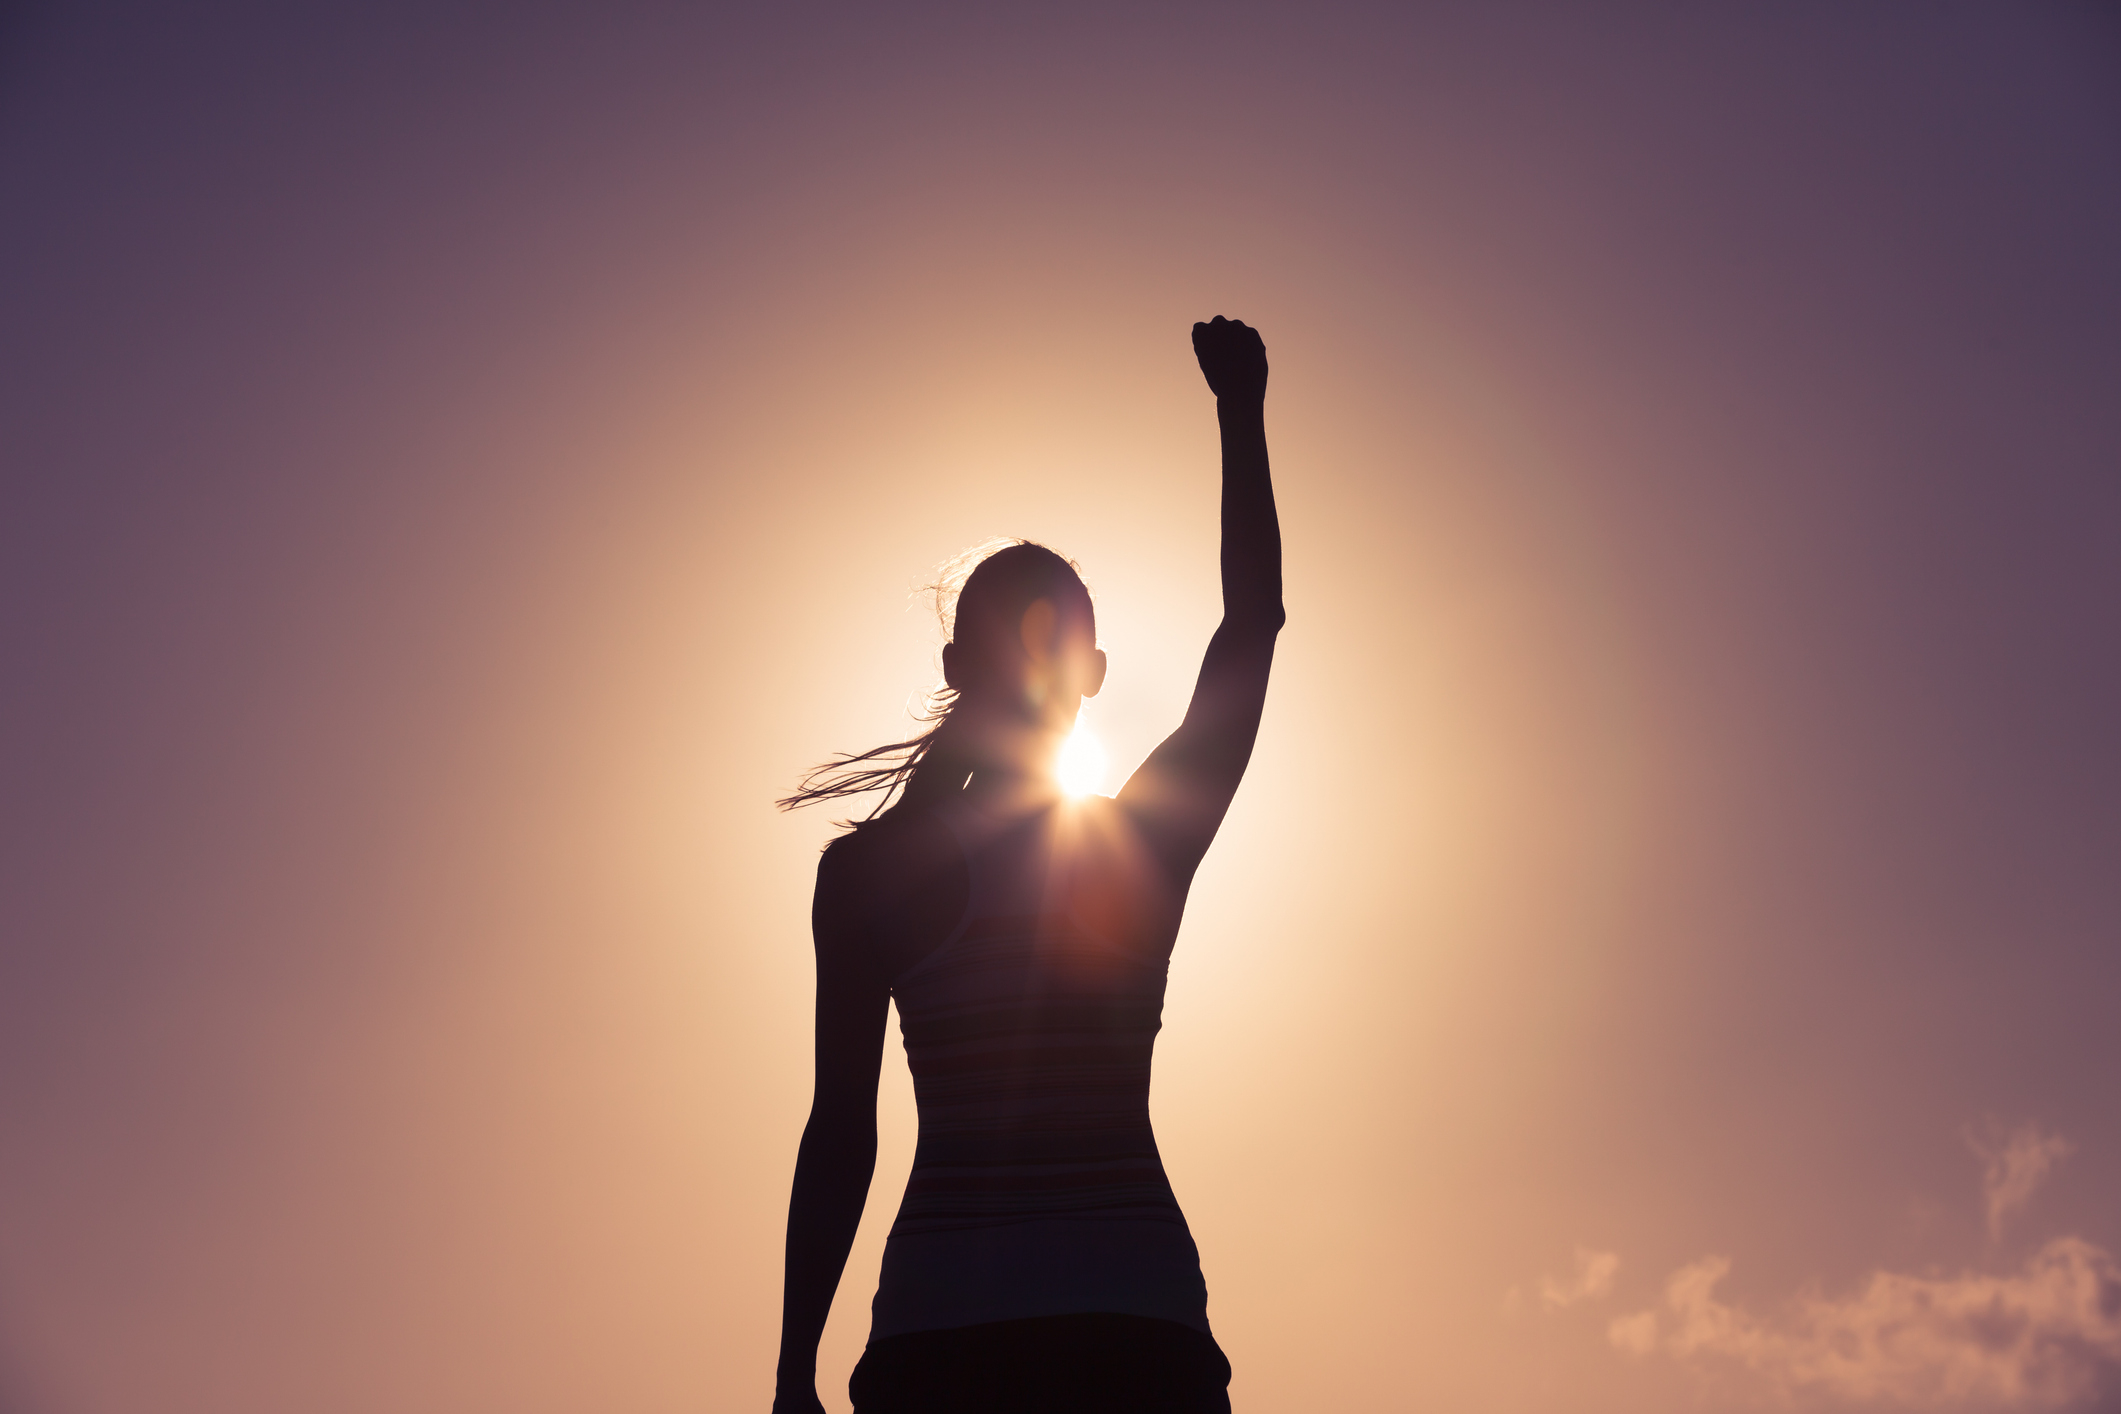 Silhouetted figure raising fist in the air against a bright backlight